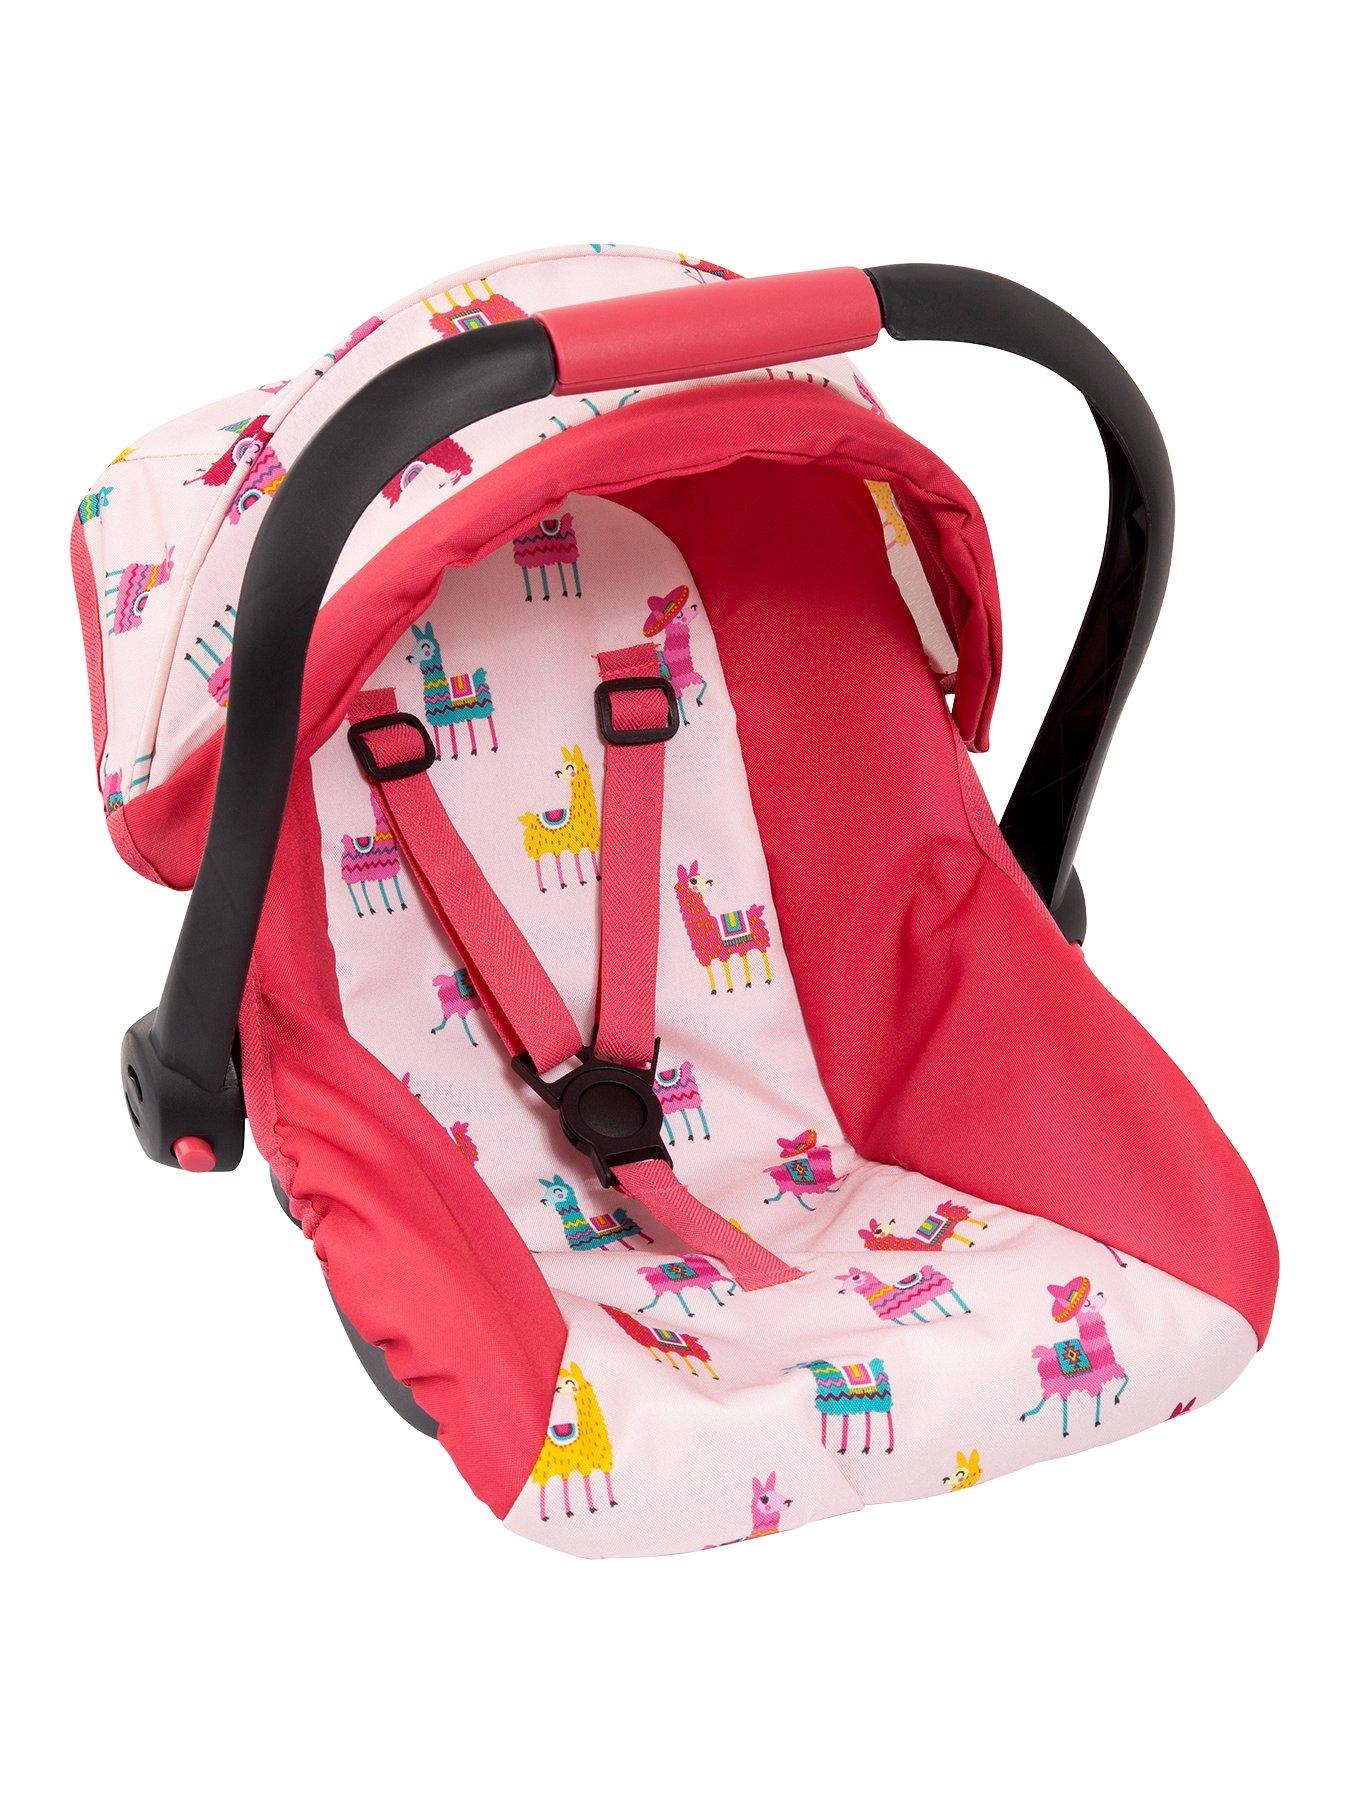 Amazon.com: Adora Doll Accessories 3-in-1 Stroller, Car Seat, Back Pack  Carrier, Perfect for Kids 3 Years & up, Pink (217602): Toys & Games